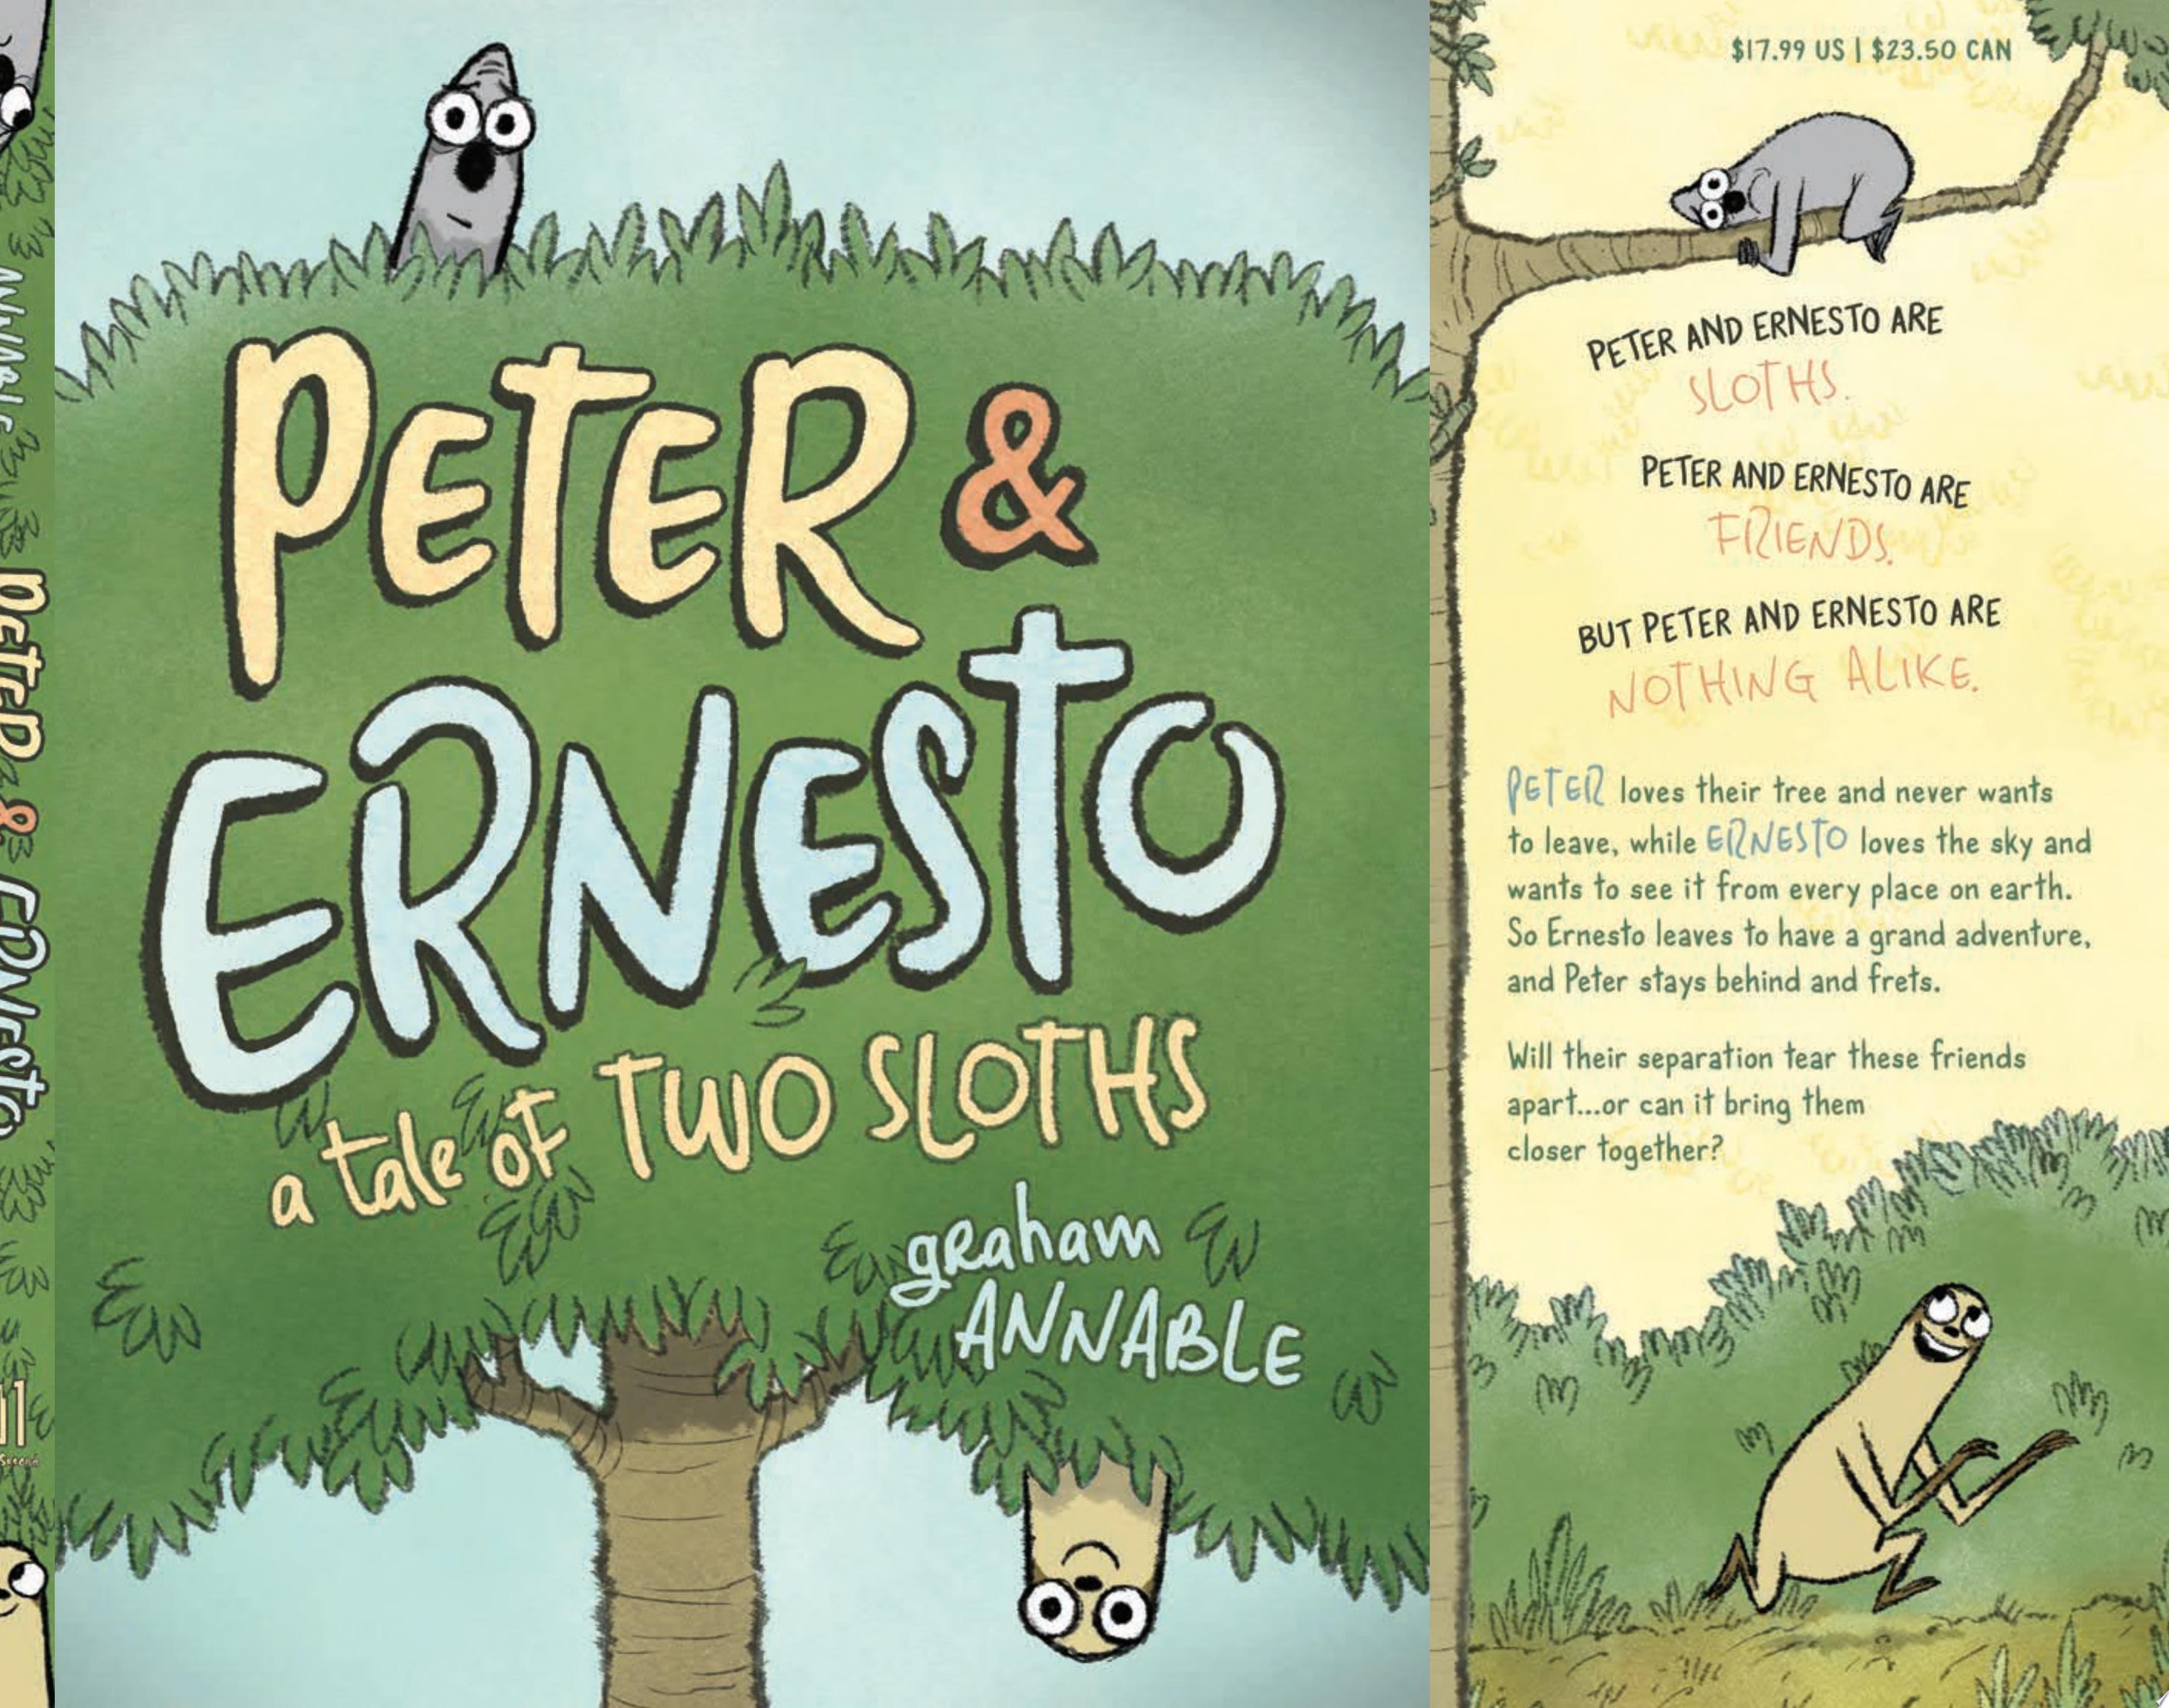 Image for "Peter &amp; Ernesto: A Tale of Two Sloths"